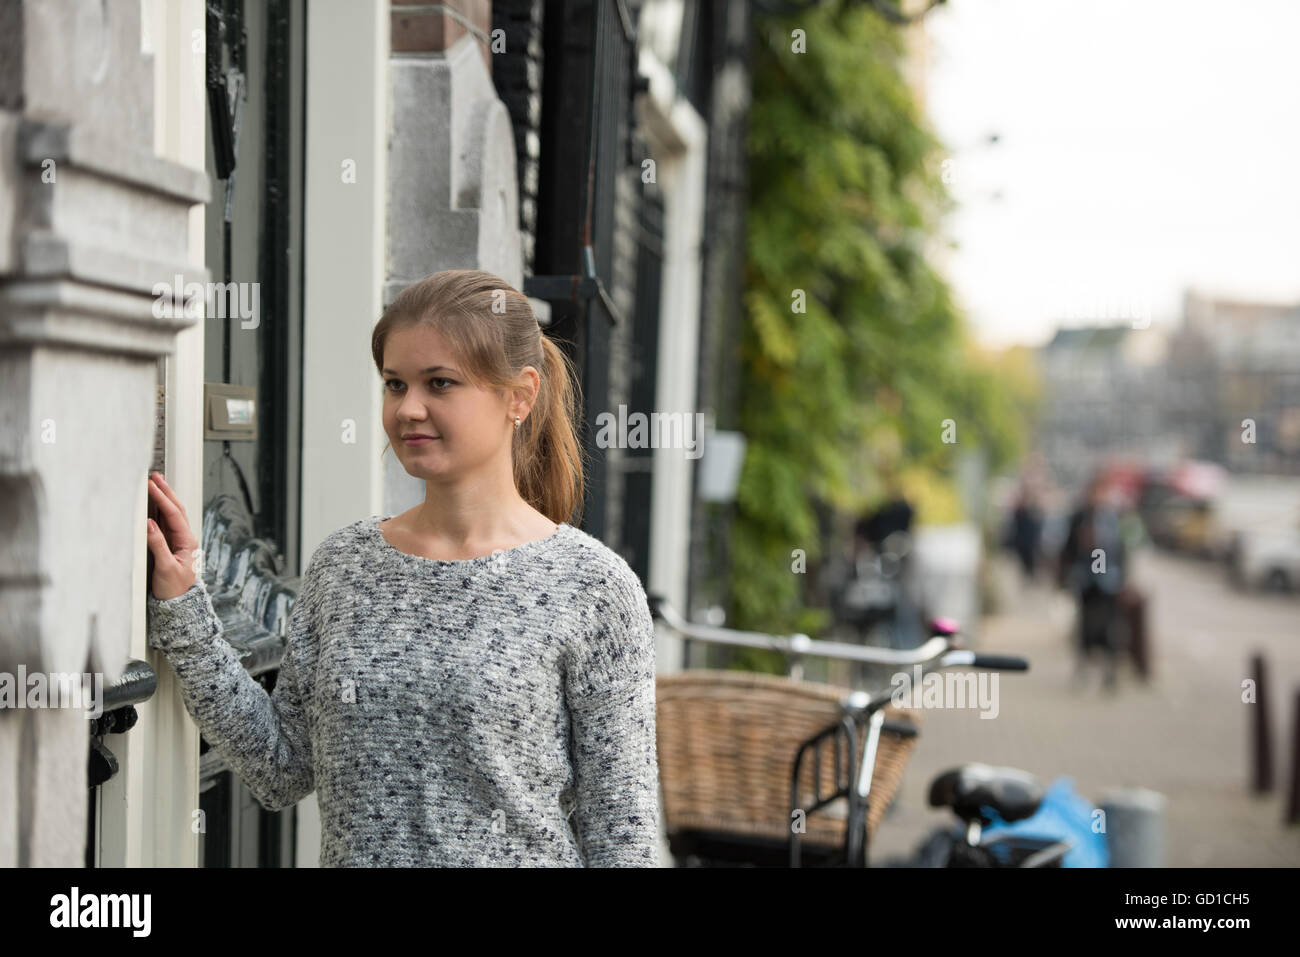 young woman in front of entrance door, ringing at the door bell Stock Photo